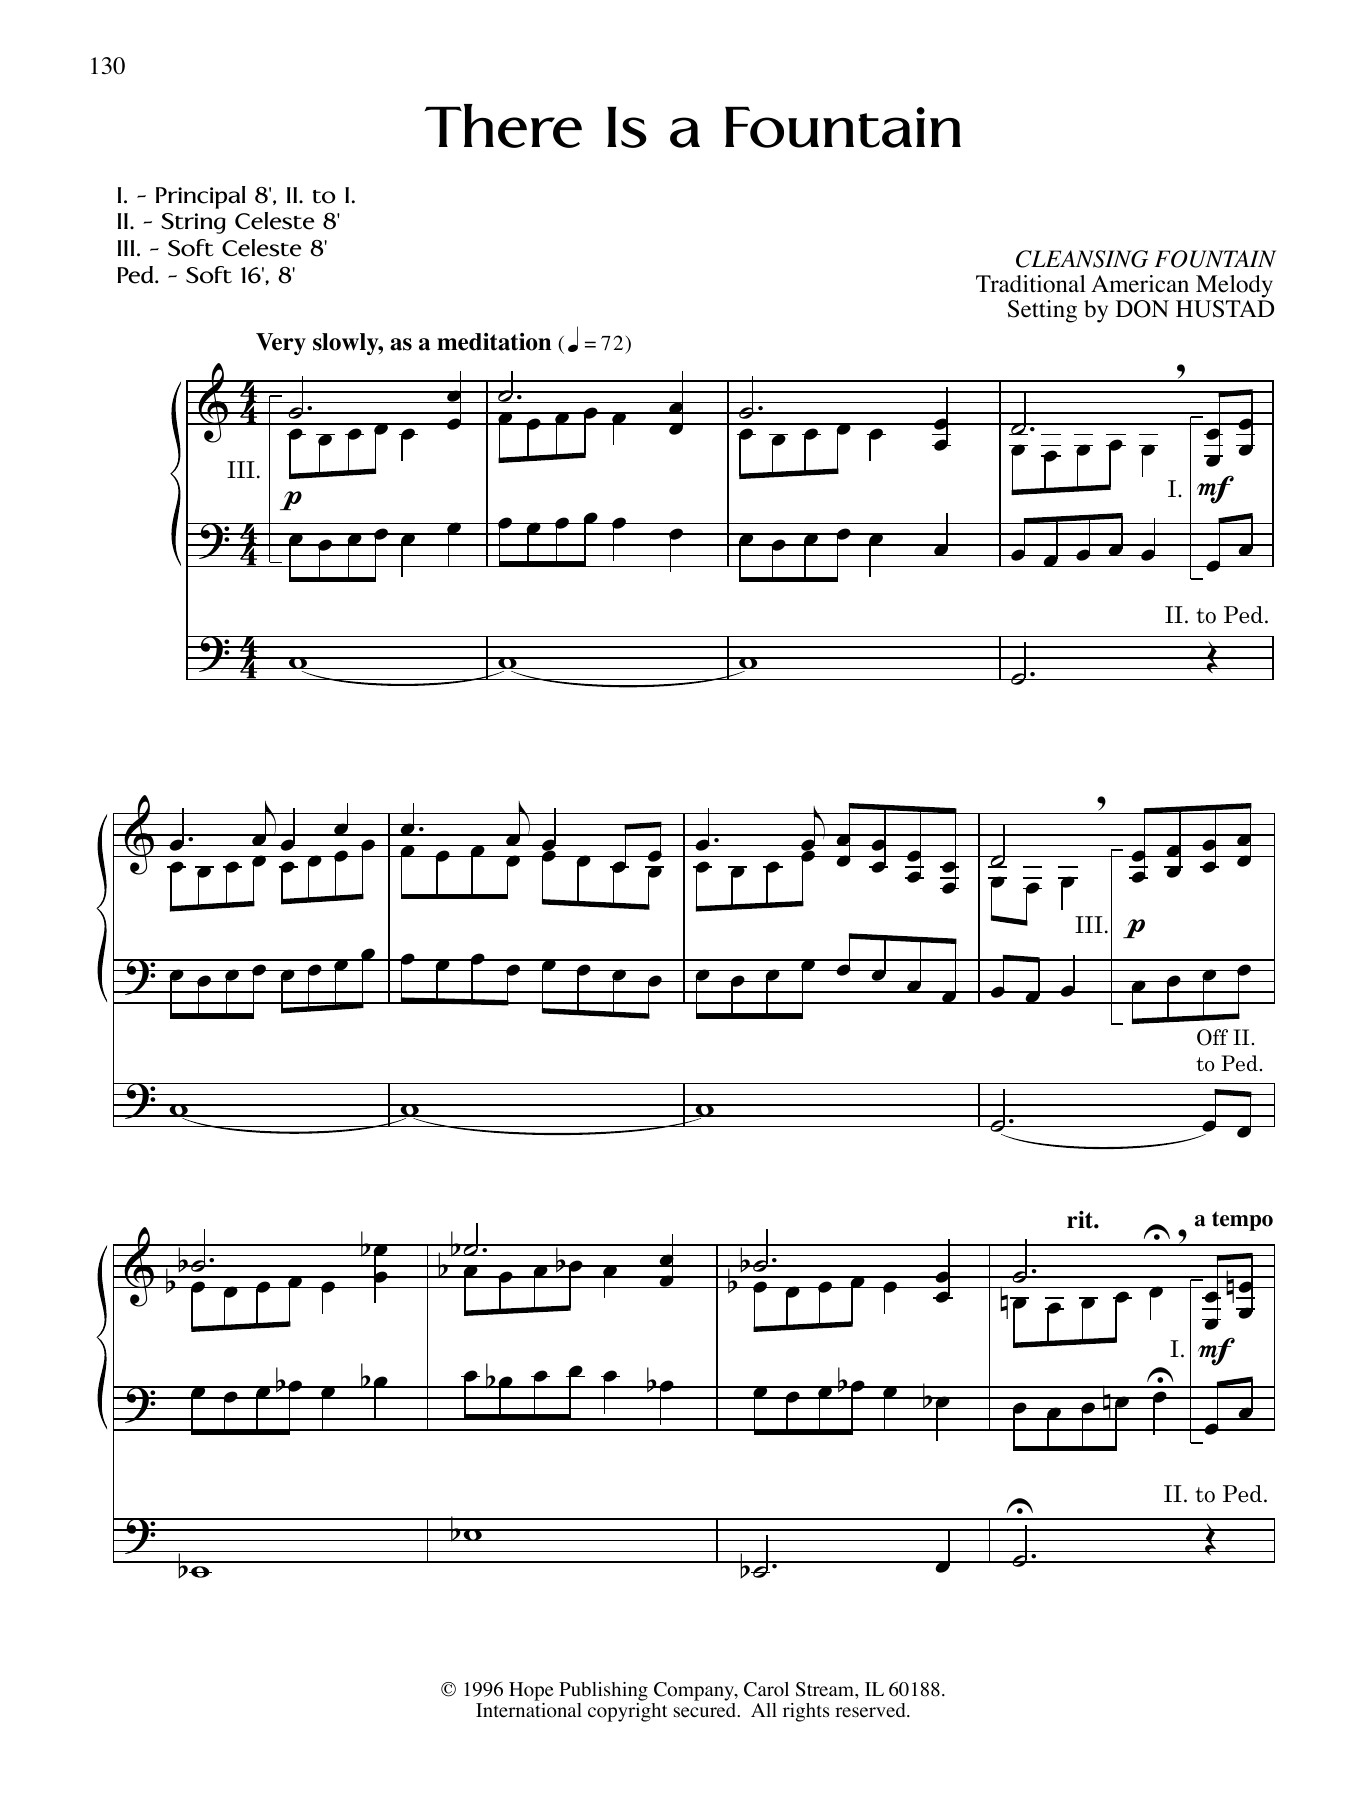 Download Don Hustad There Is a Fountain Sheet Music